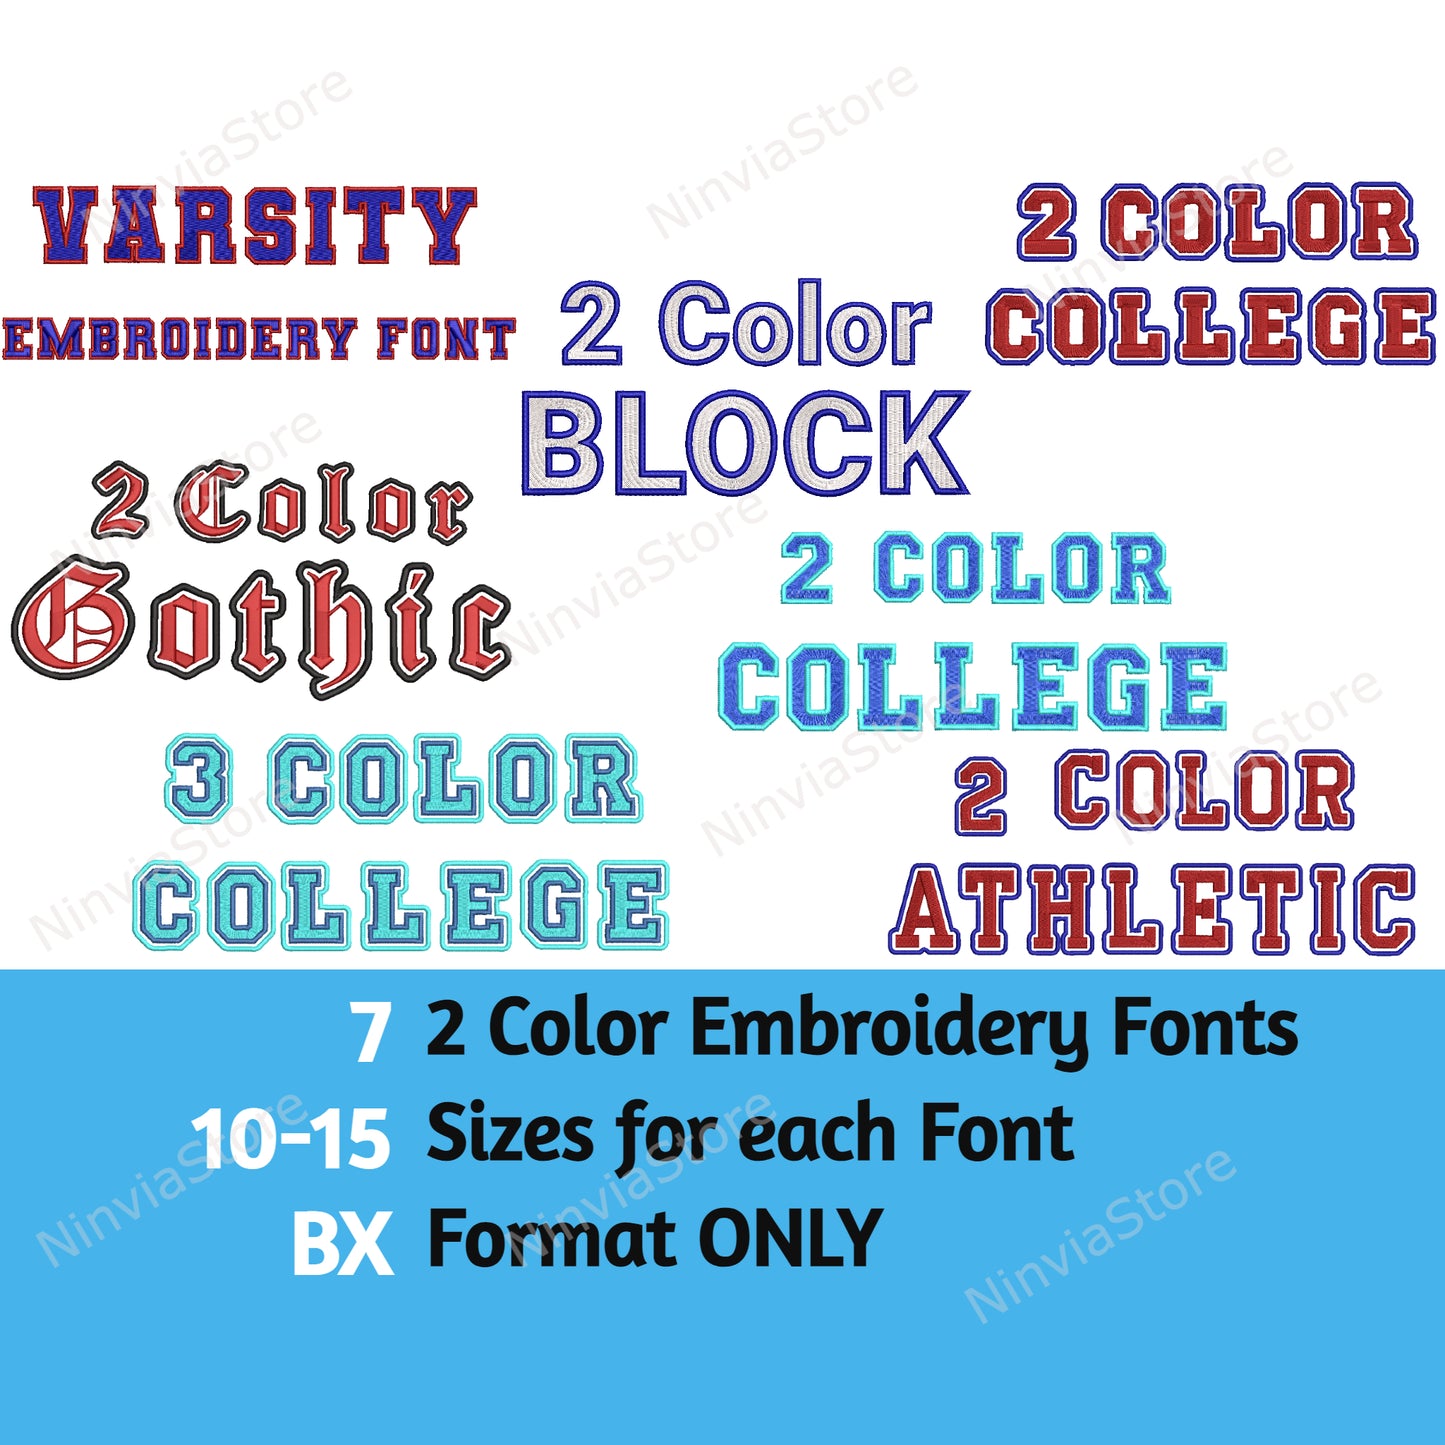 Embroidery Fonts Bundle Machine Embroidery Monogram Fonts 